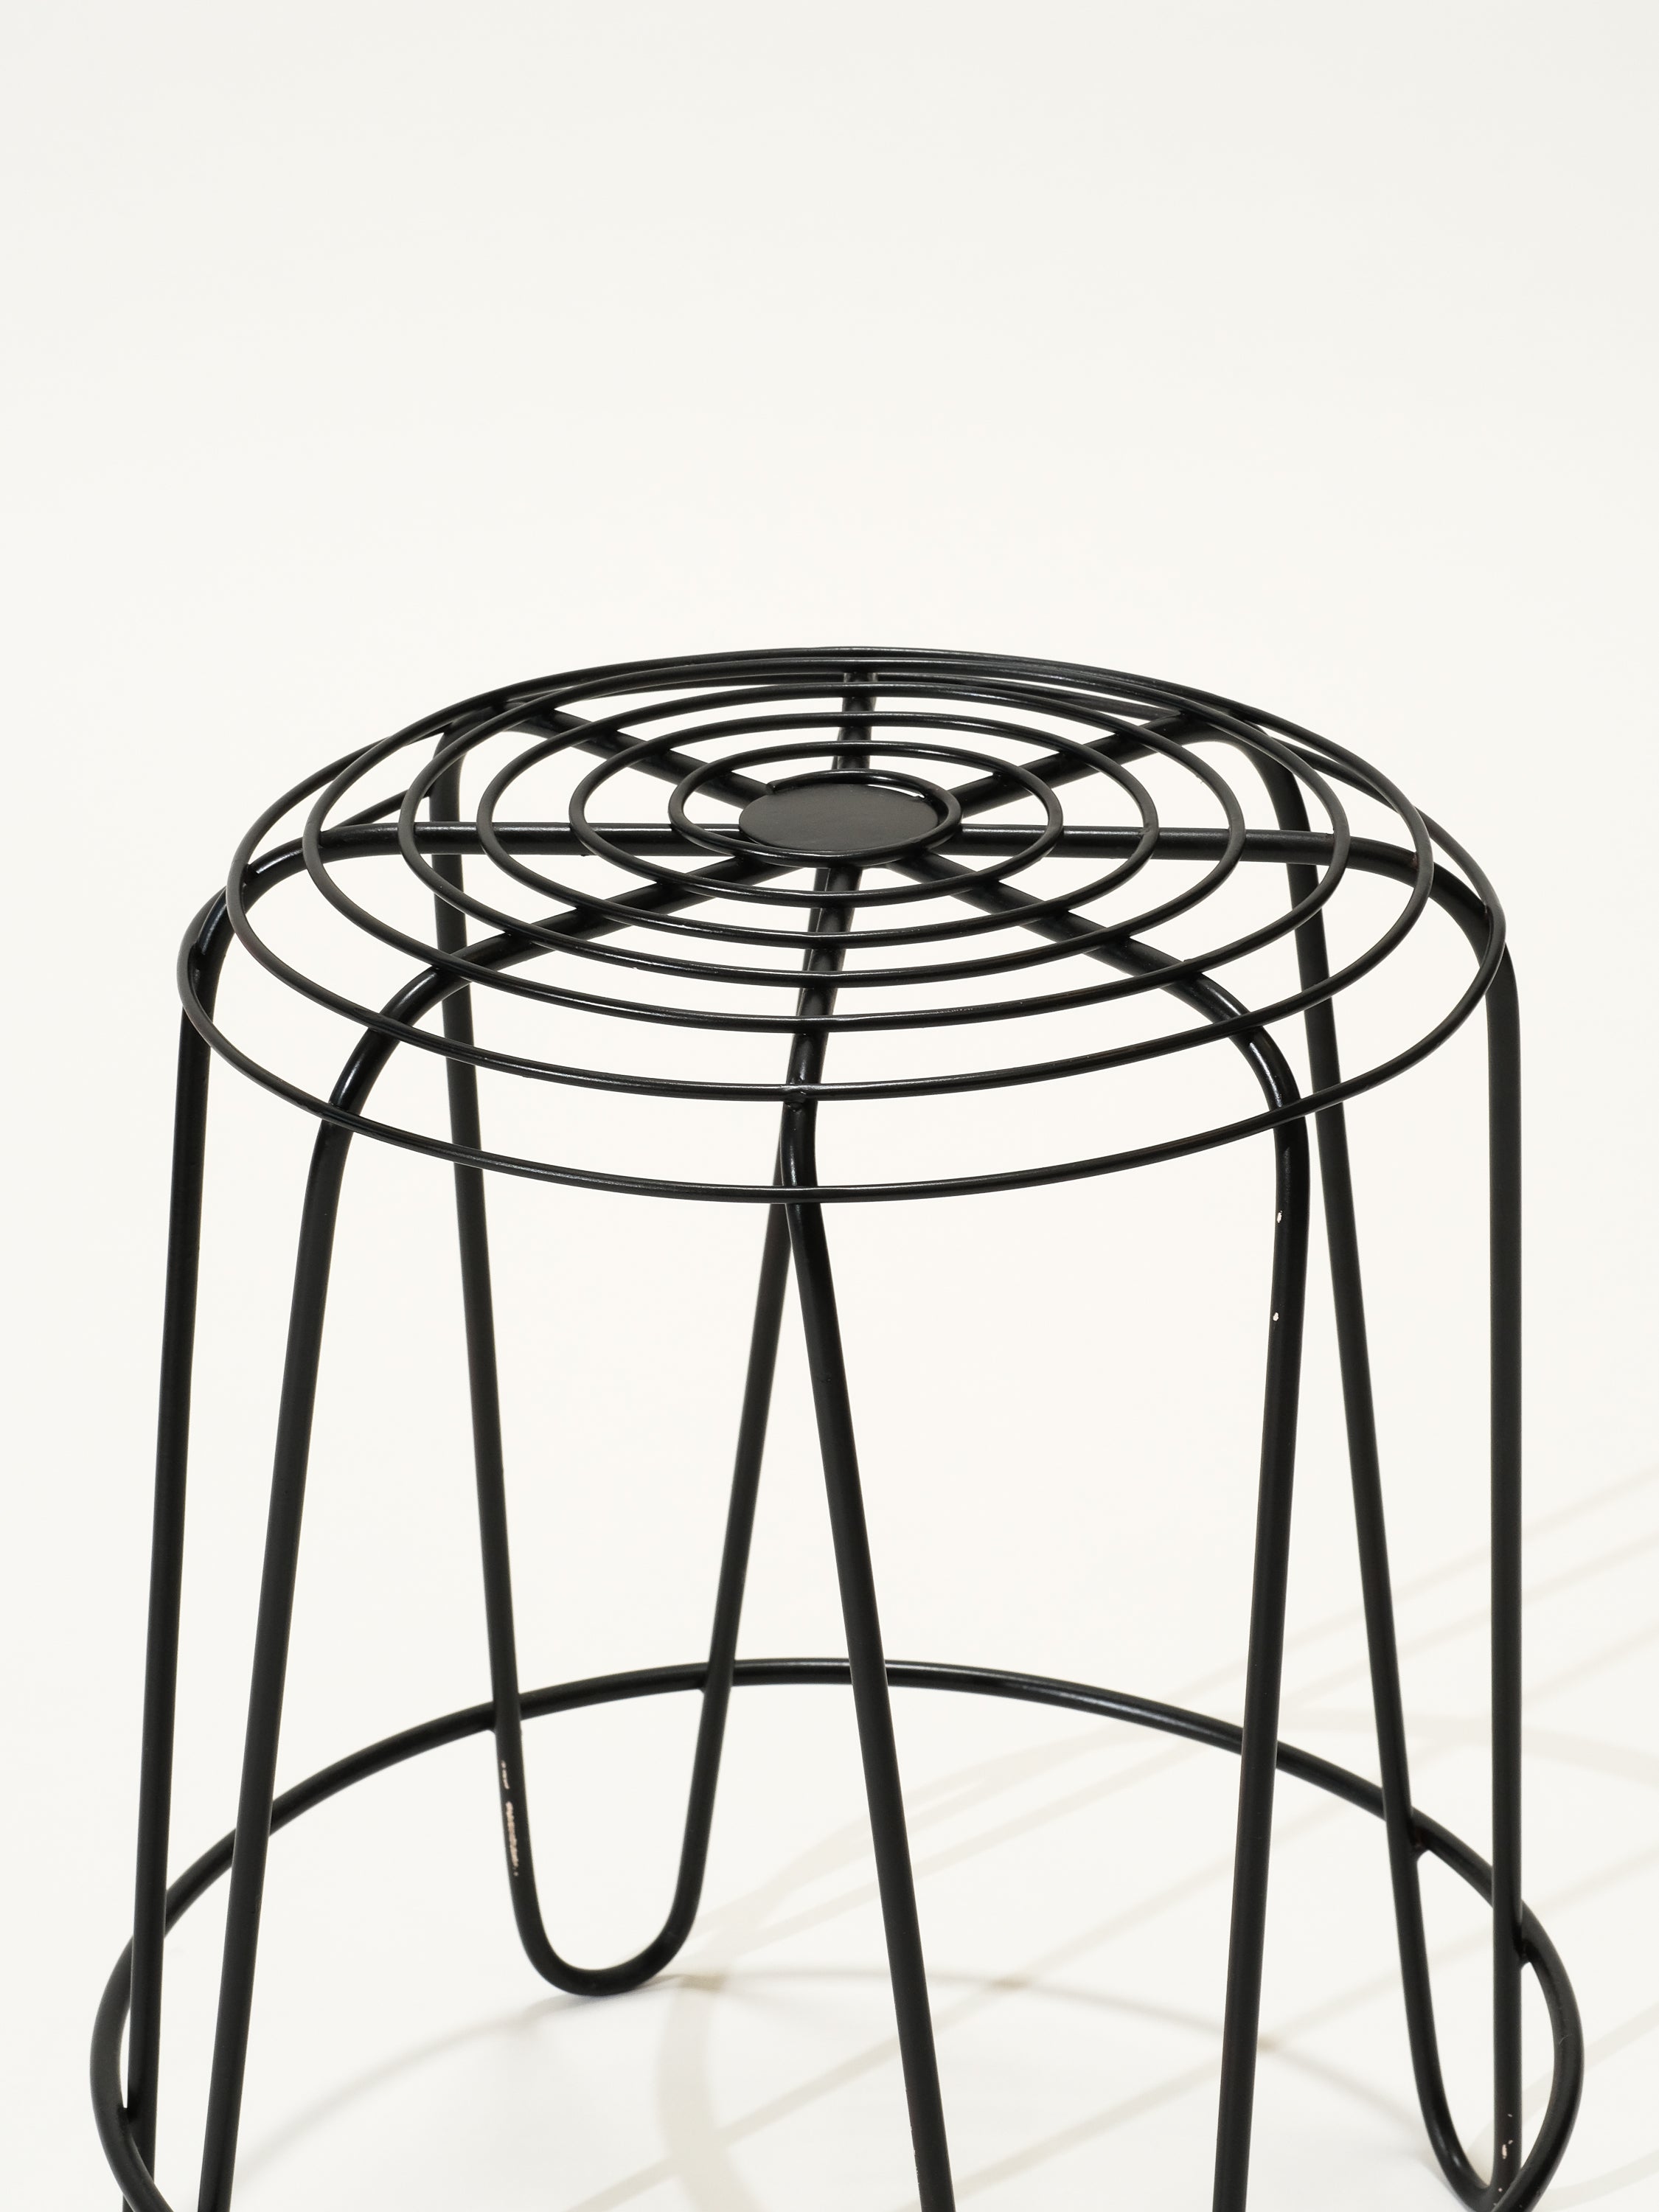 A Tempo Stool, Pauline Deltour for Alessi